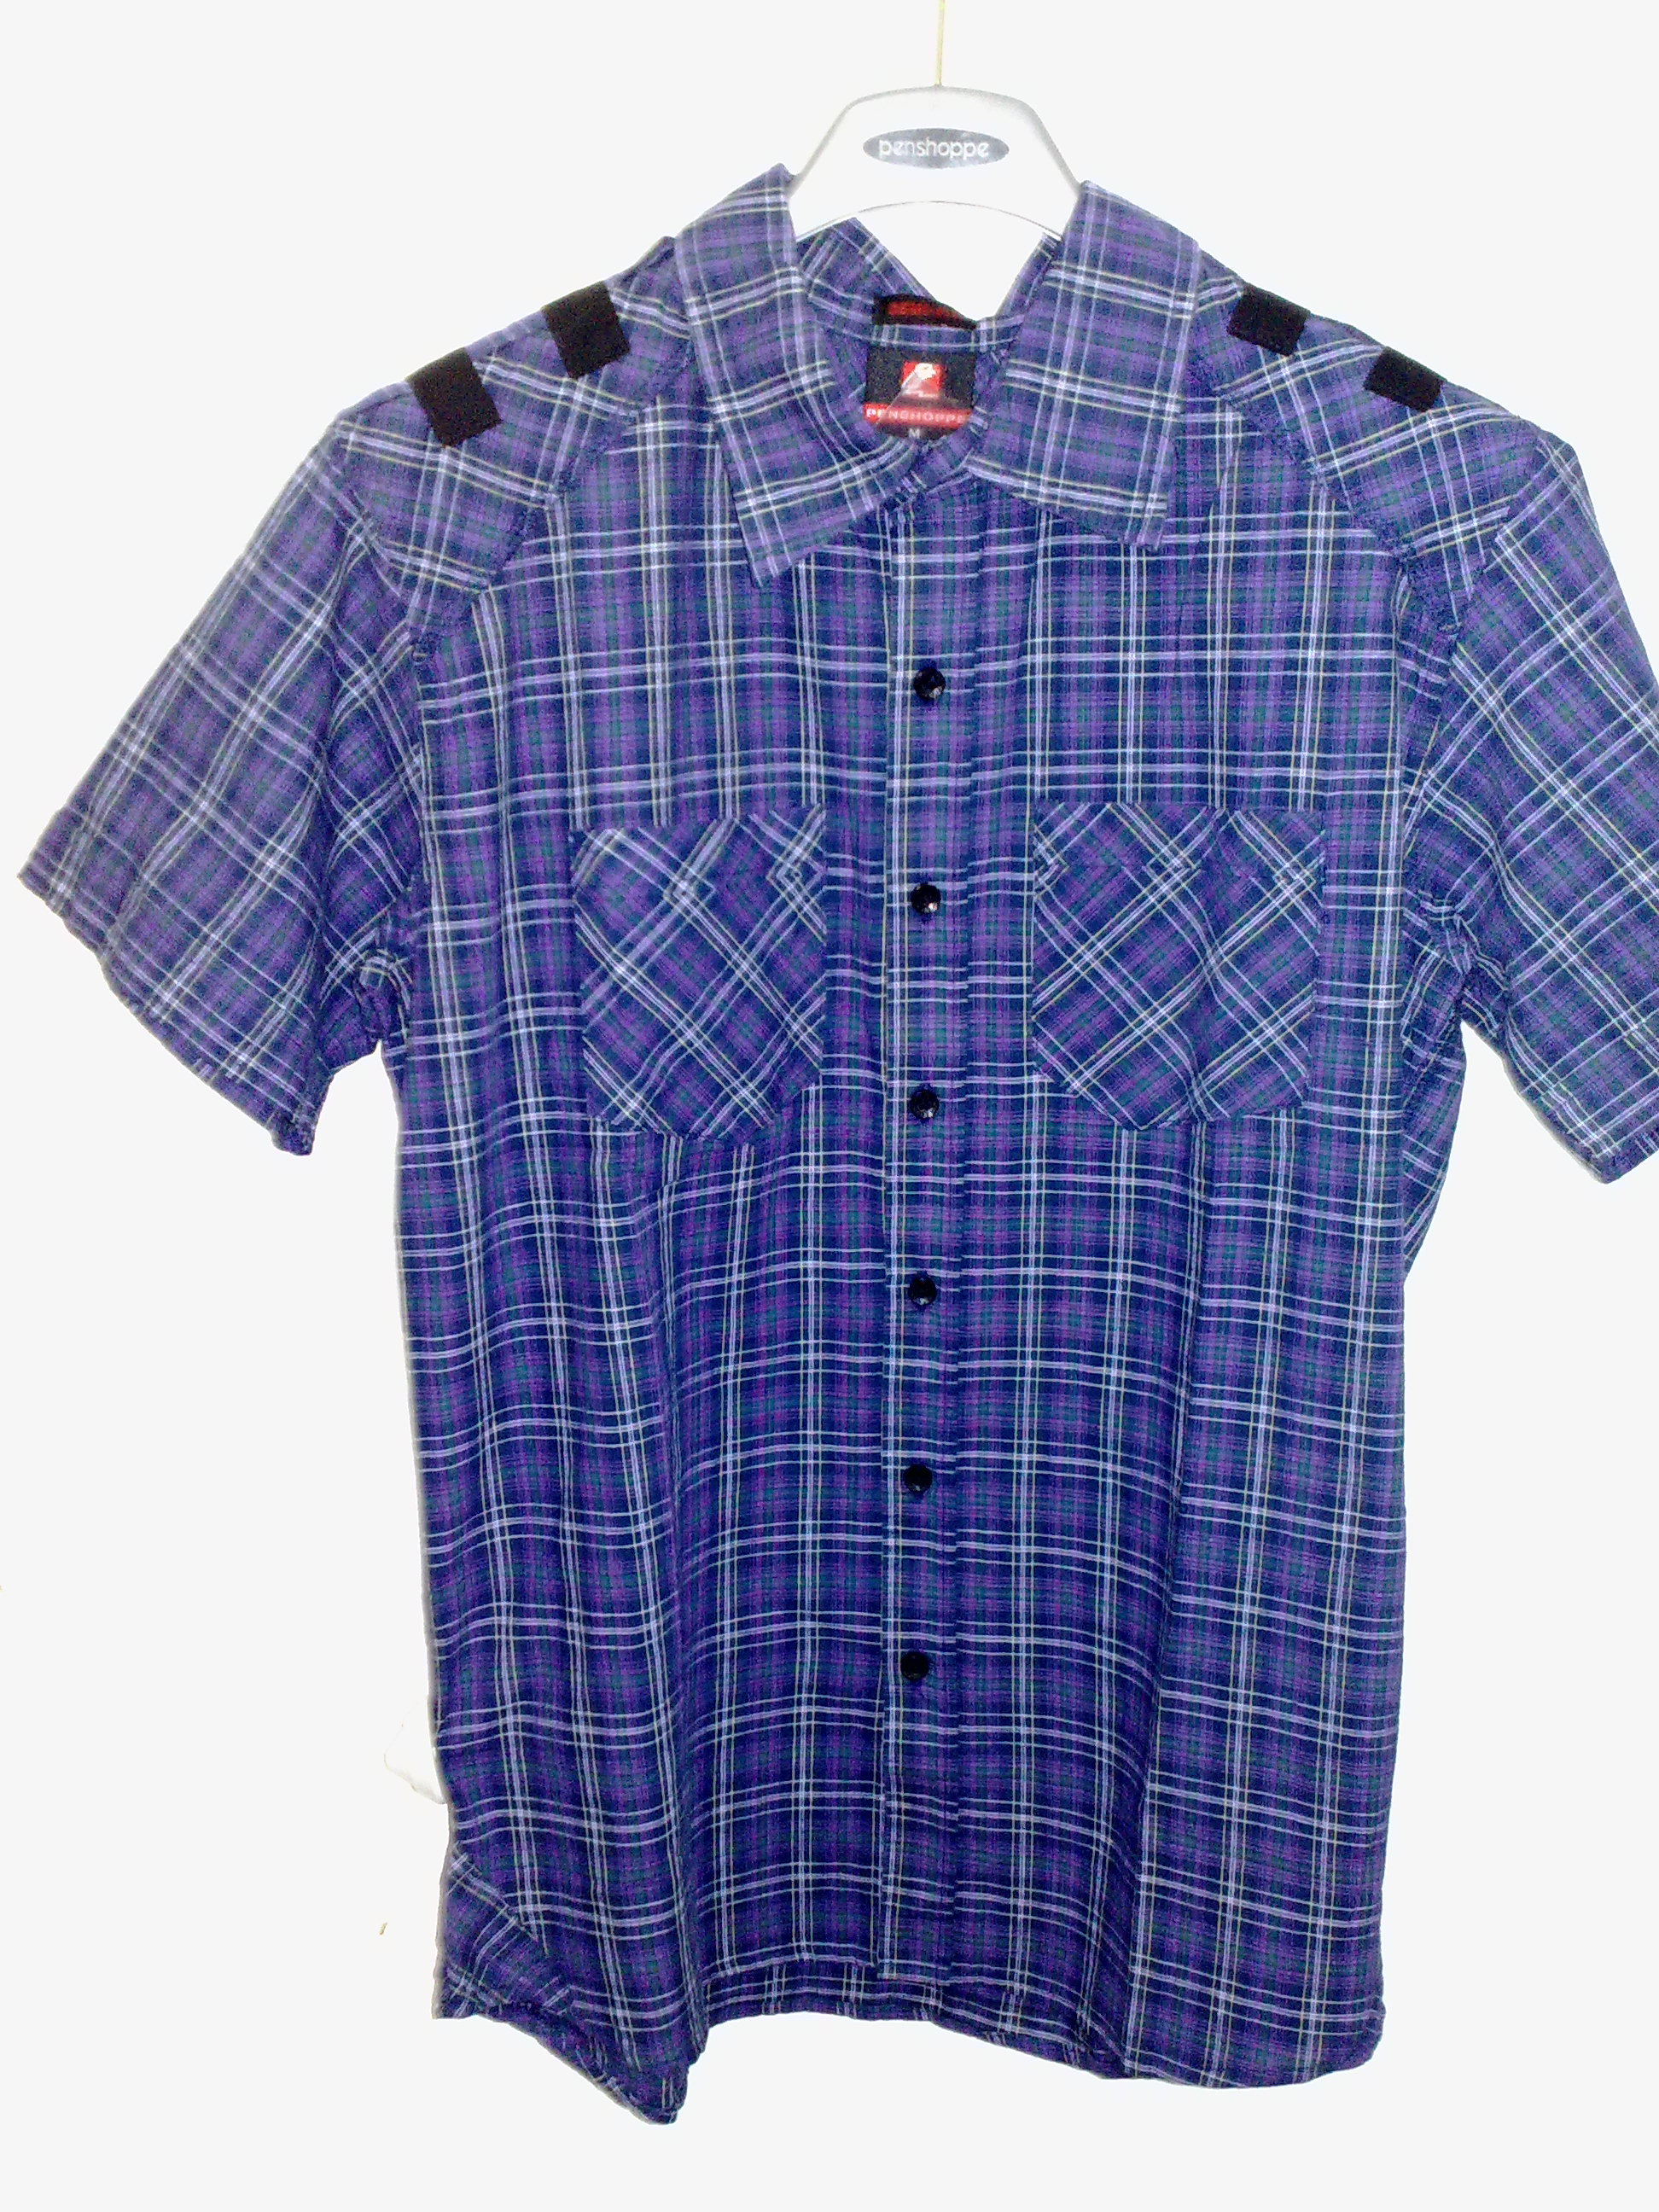 Plaid Polo is still in and is good for any occasion - Pinoy Guy Guide